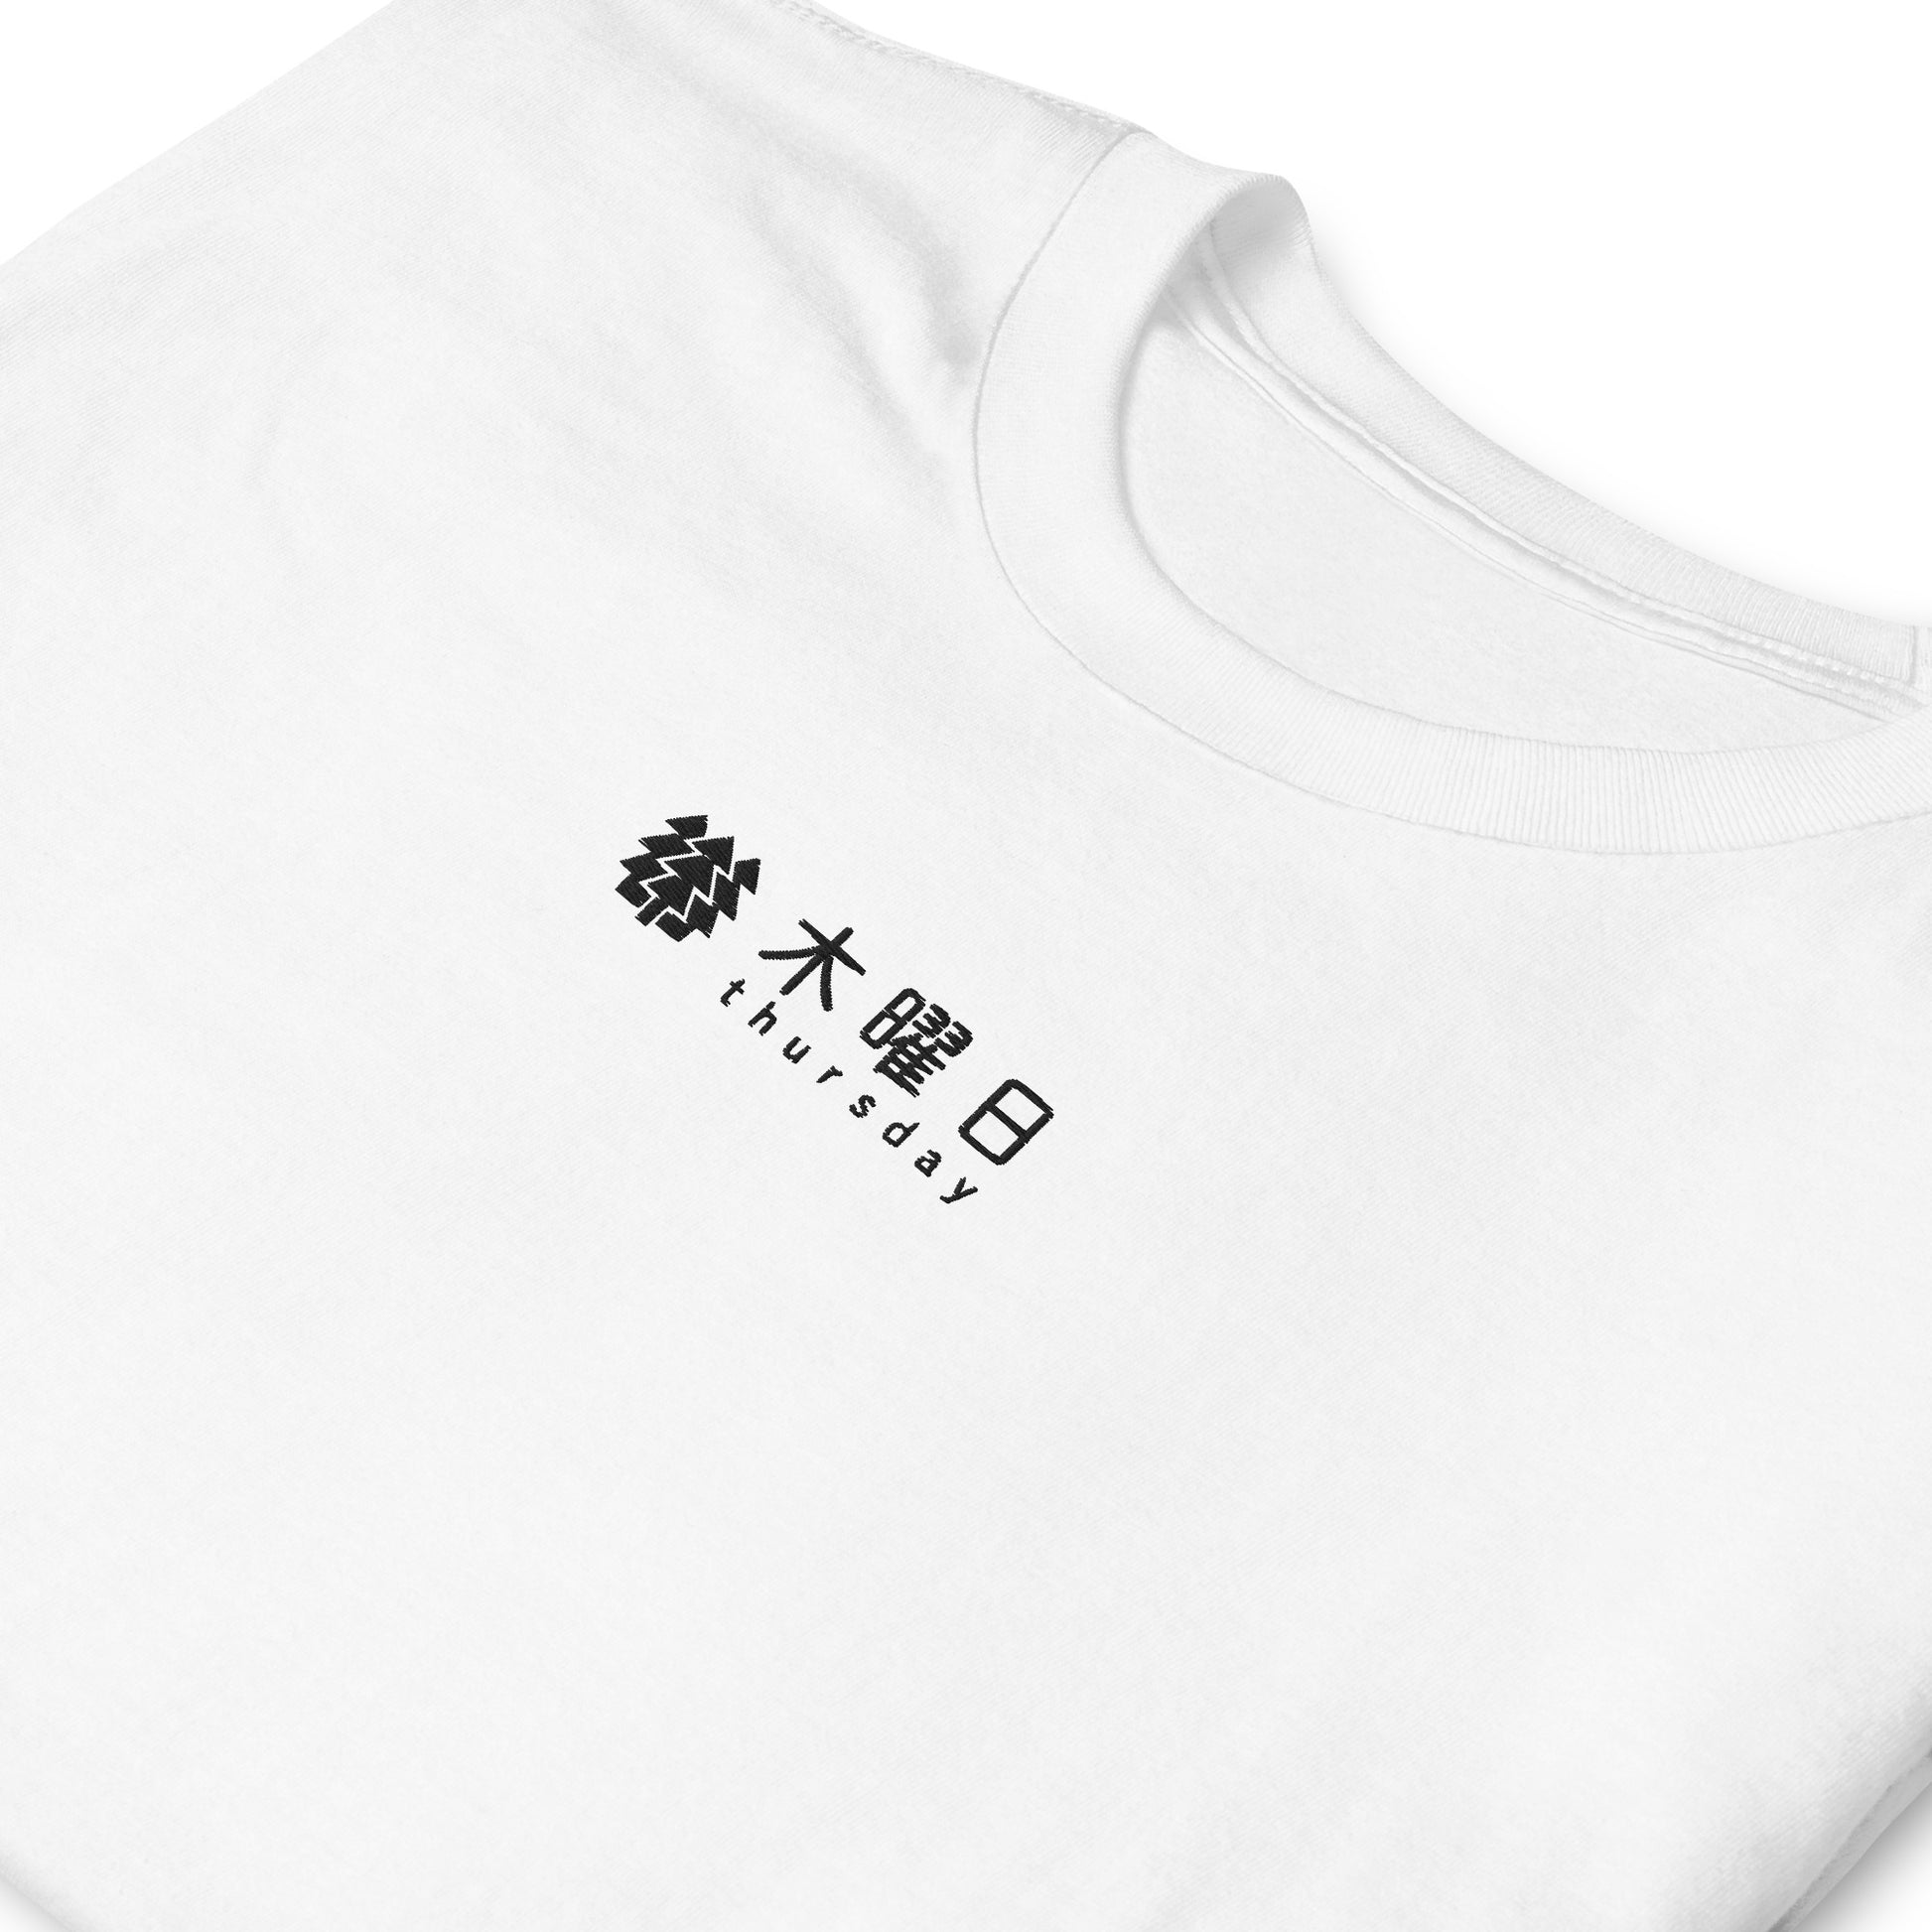 White High Quality Tee - Front Design with an White Embroidery "Thursday" in Japanese and English